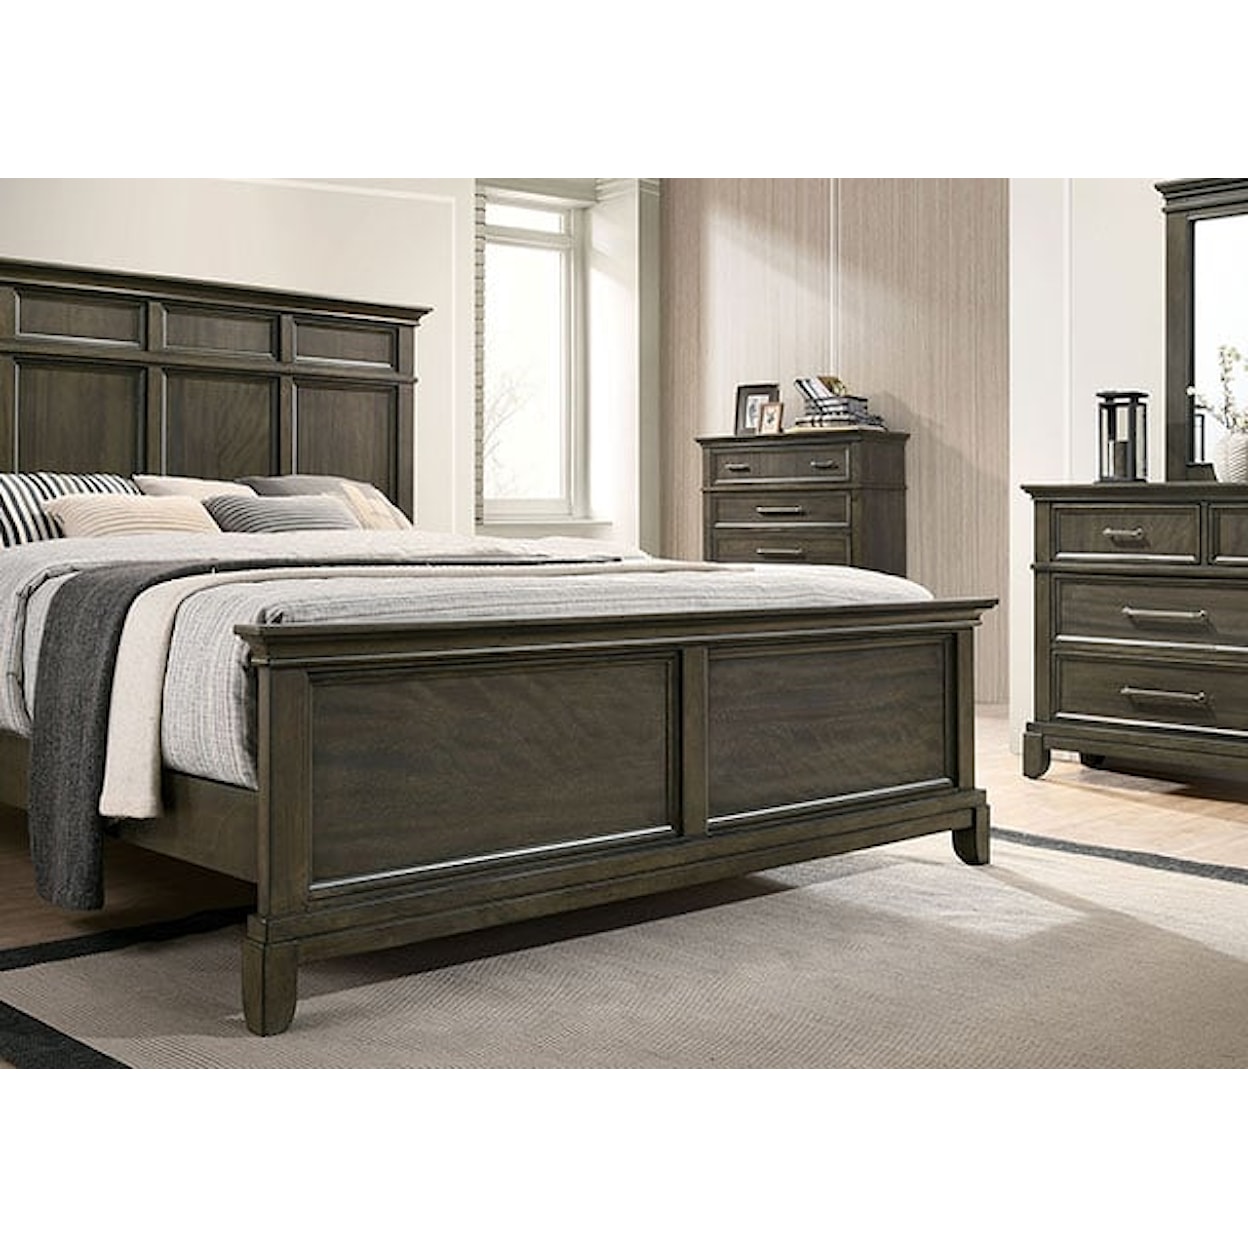 Furniture of America Houston King Panel Bed